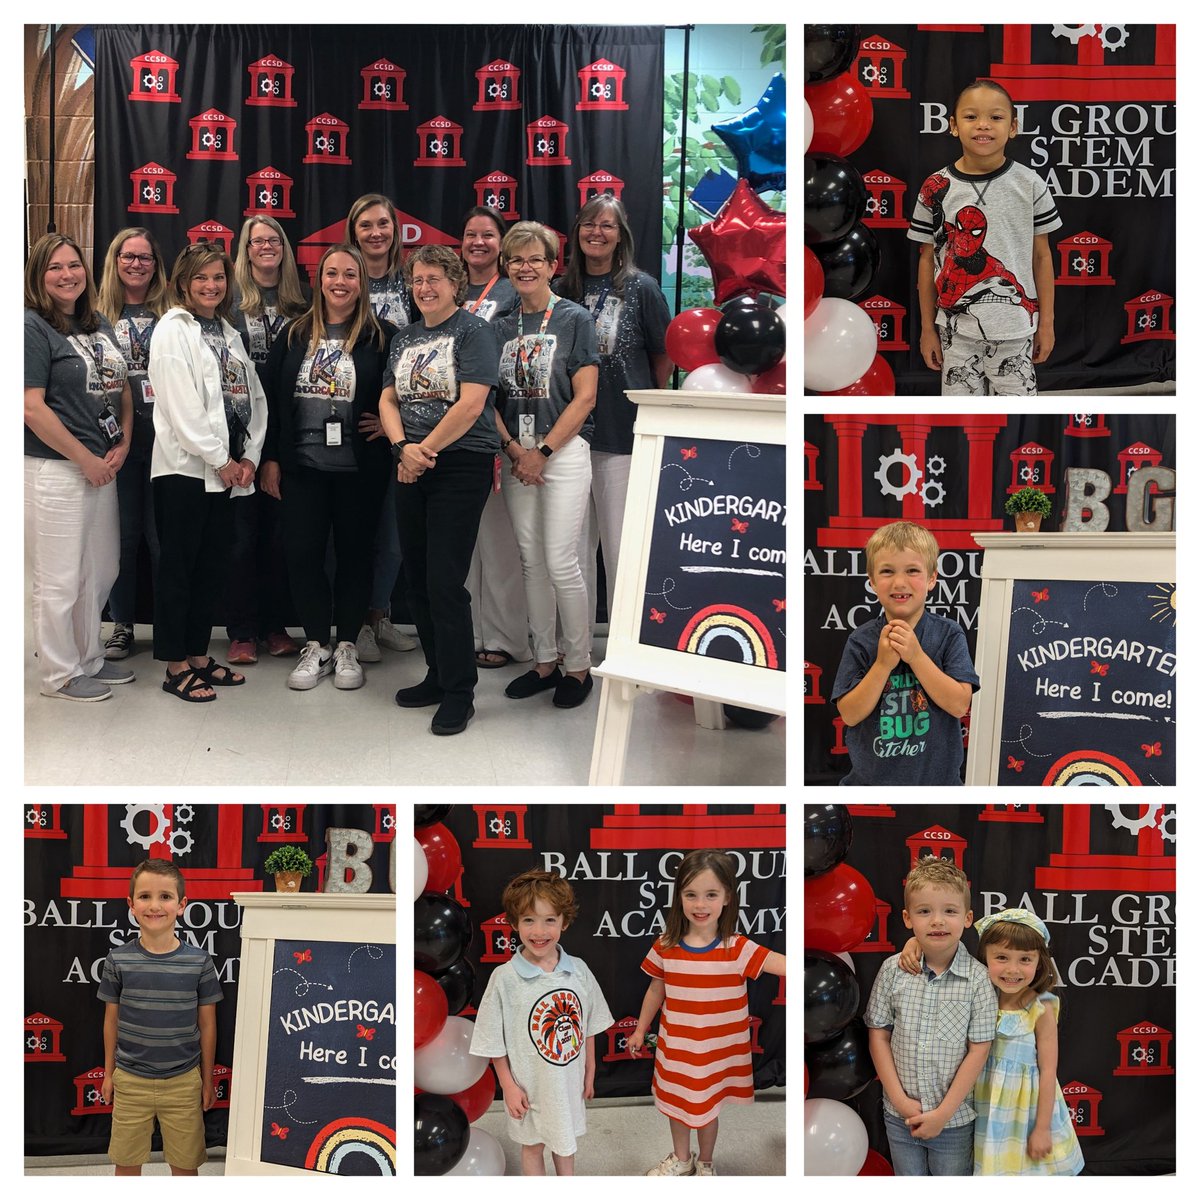 We had a great time meeting our rising Kindergarten students at the Kindergarten Pow Wow! We are looking forward to welcoming these students as Ball Ground Indians very soon! Thank you parents and families for taking the time to visit us today! #ballgroundstrong #4tribes1family